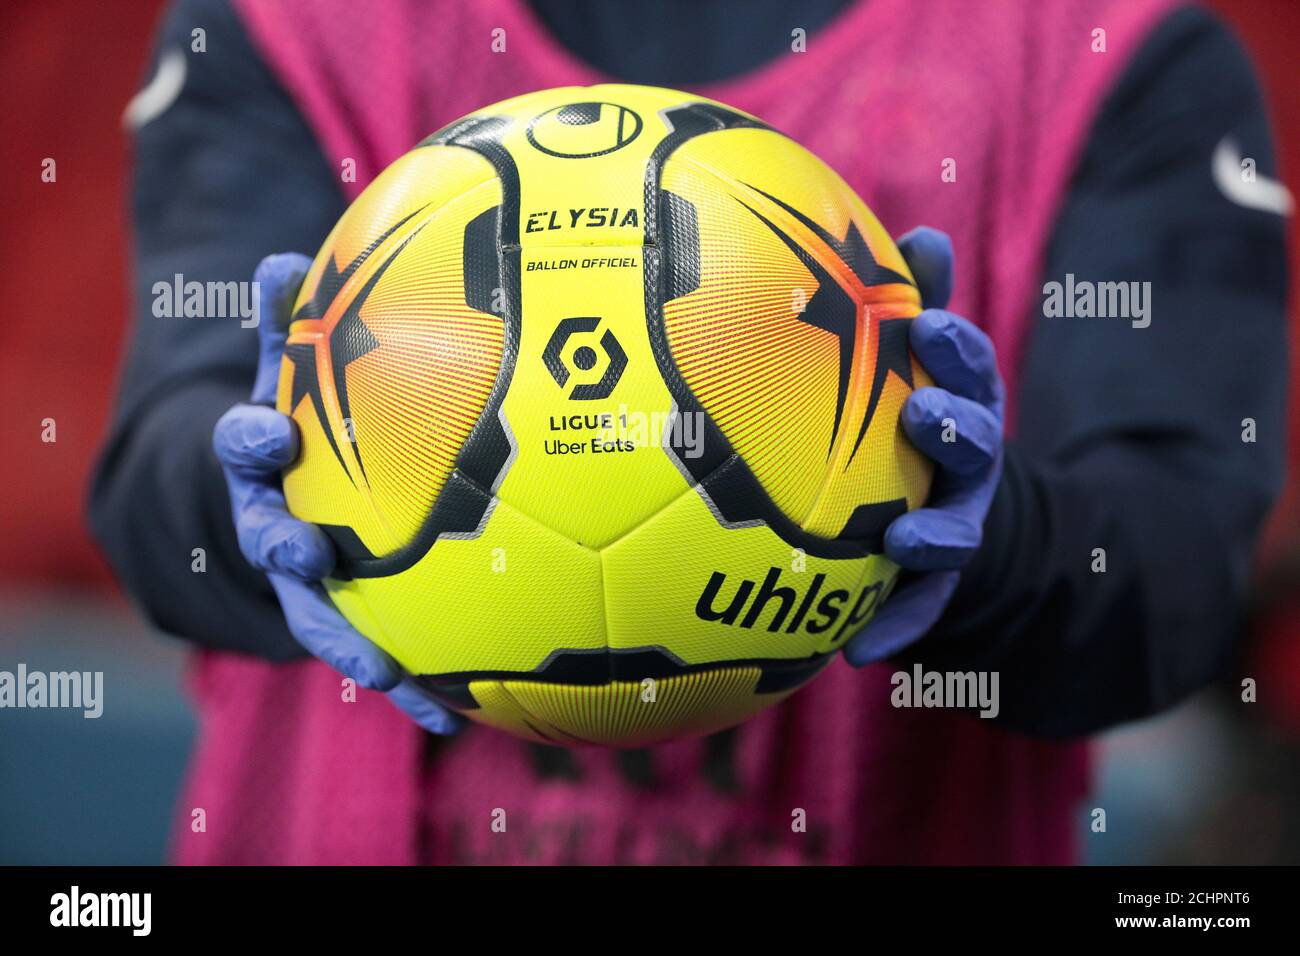 Illustration of the official ball Ligue 1 Uber Eats Elysia by Uhlsport saison 2020 - 2021 in hand of line out assistant weared with surgical gloves ag Stock Photo